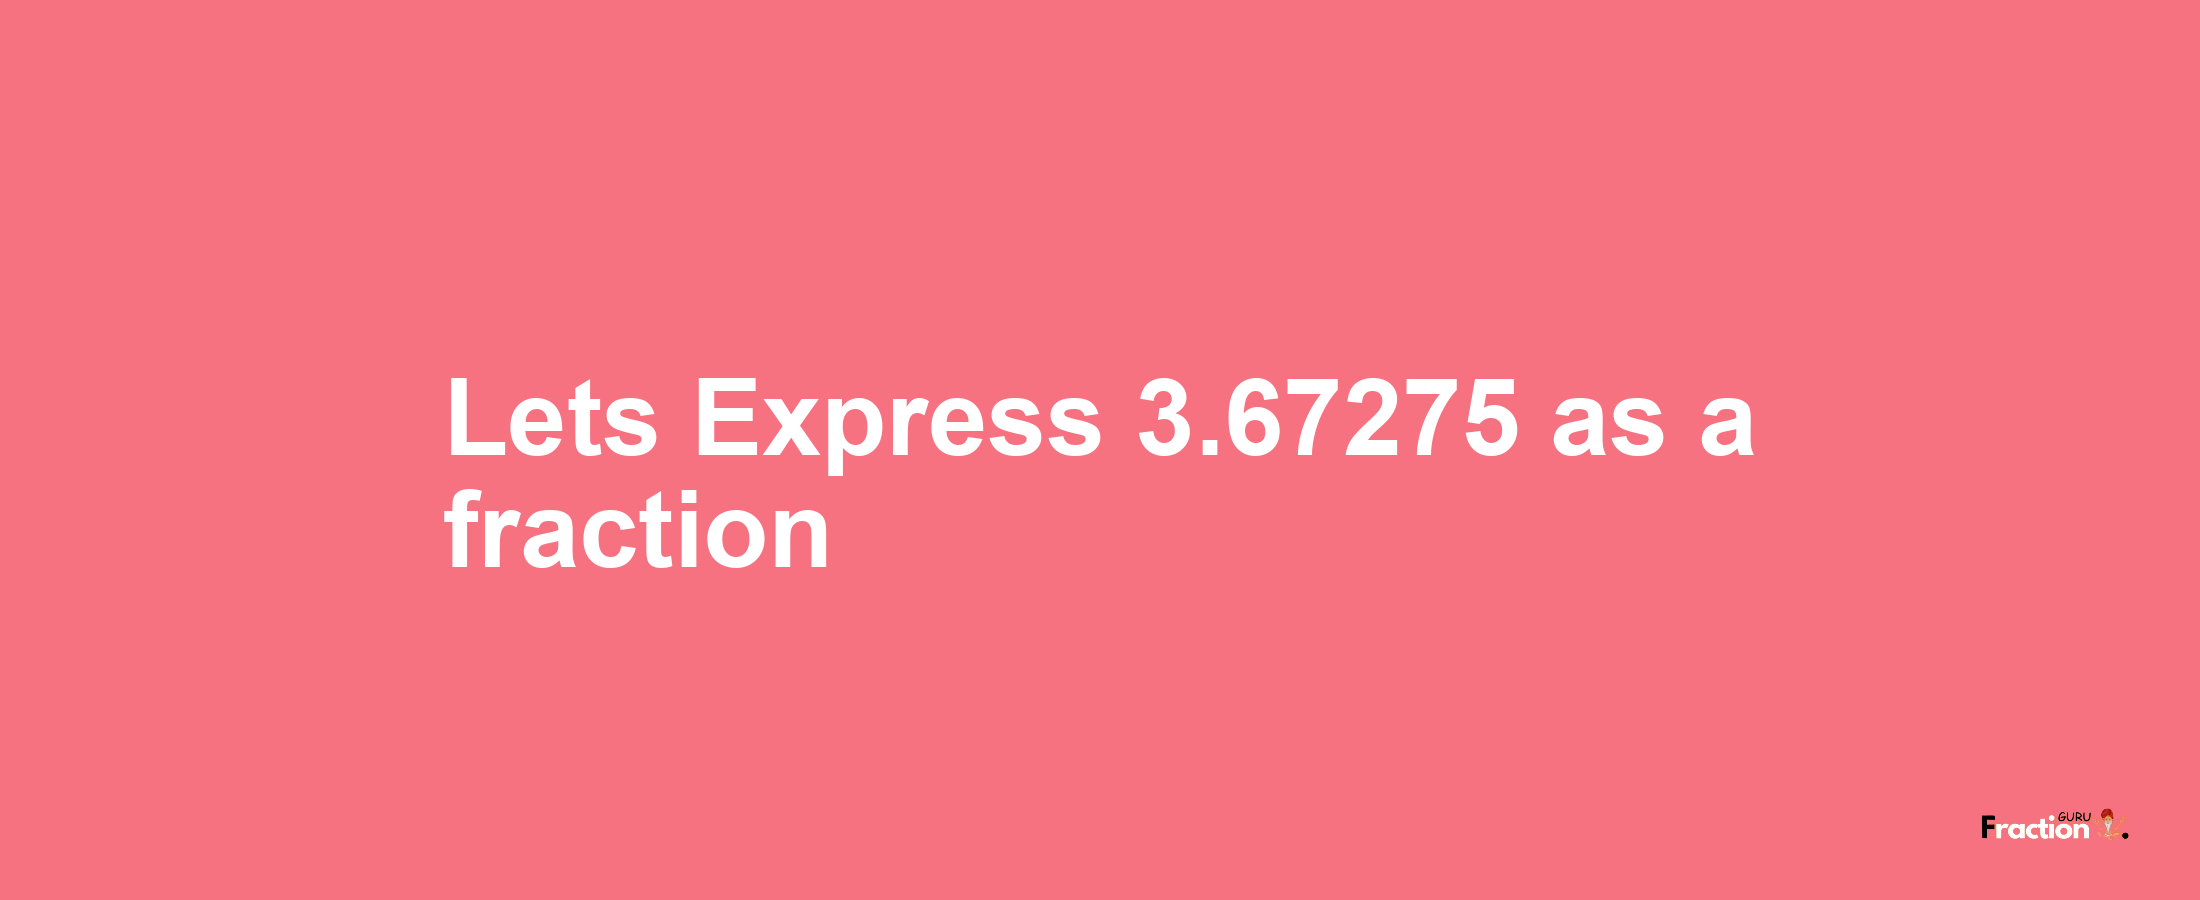 Lets Express 3.67275 as afraction